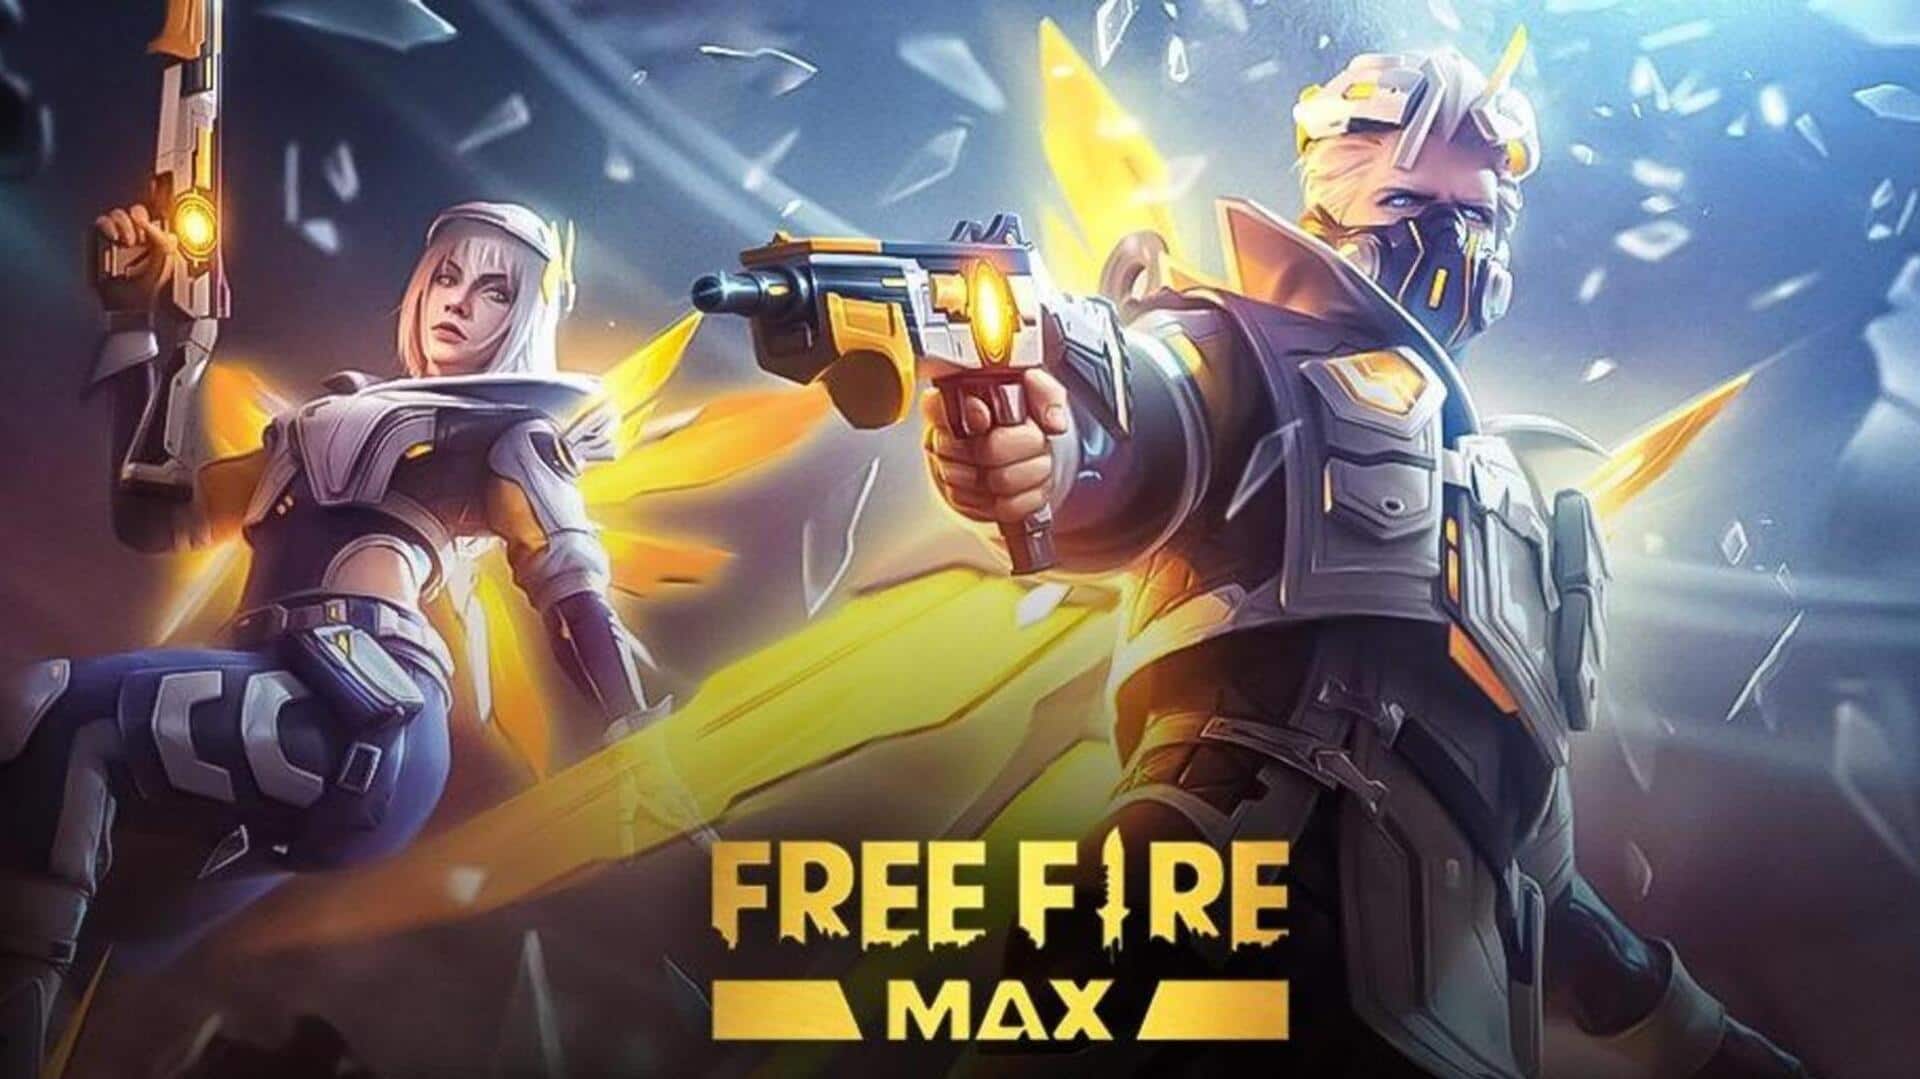 Free Fire MAX codes for October 12: How to redeem